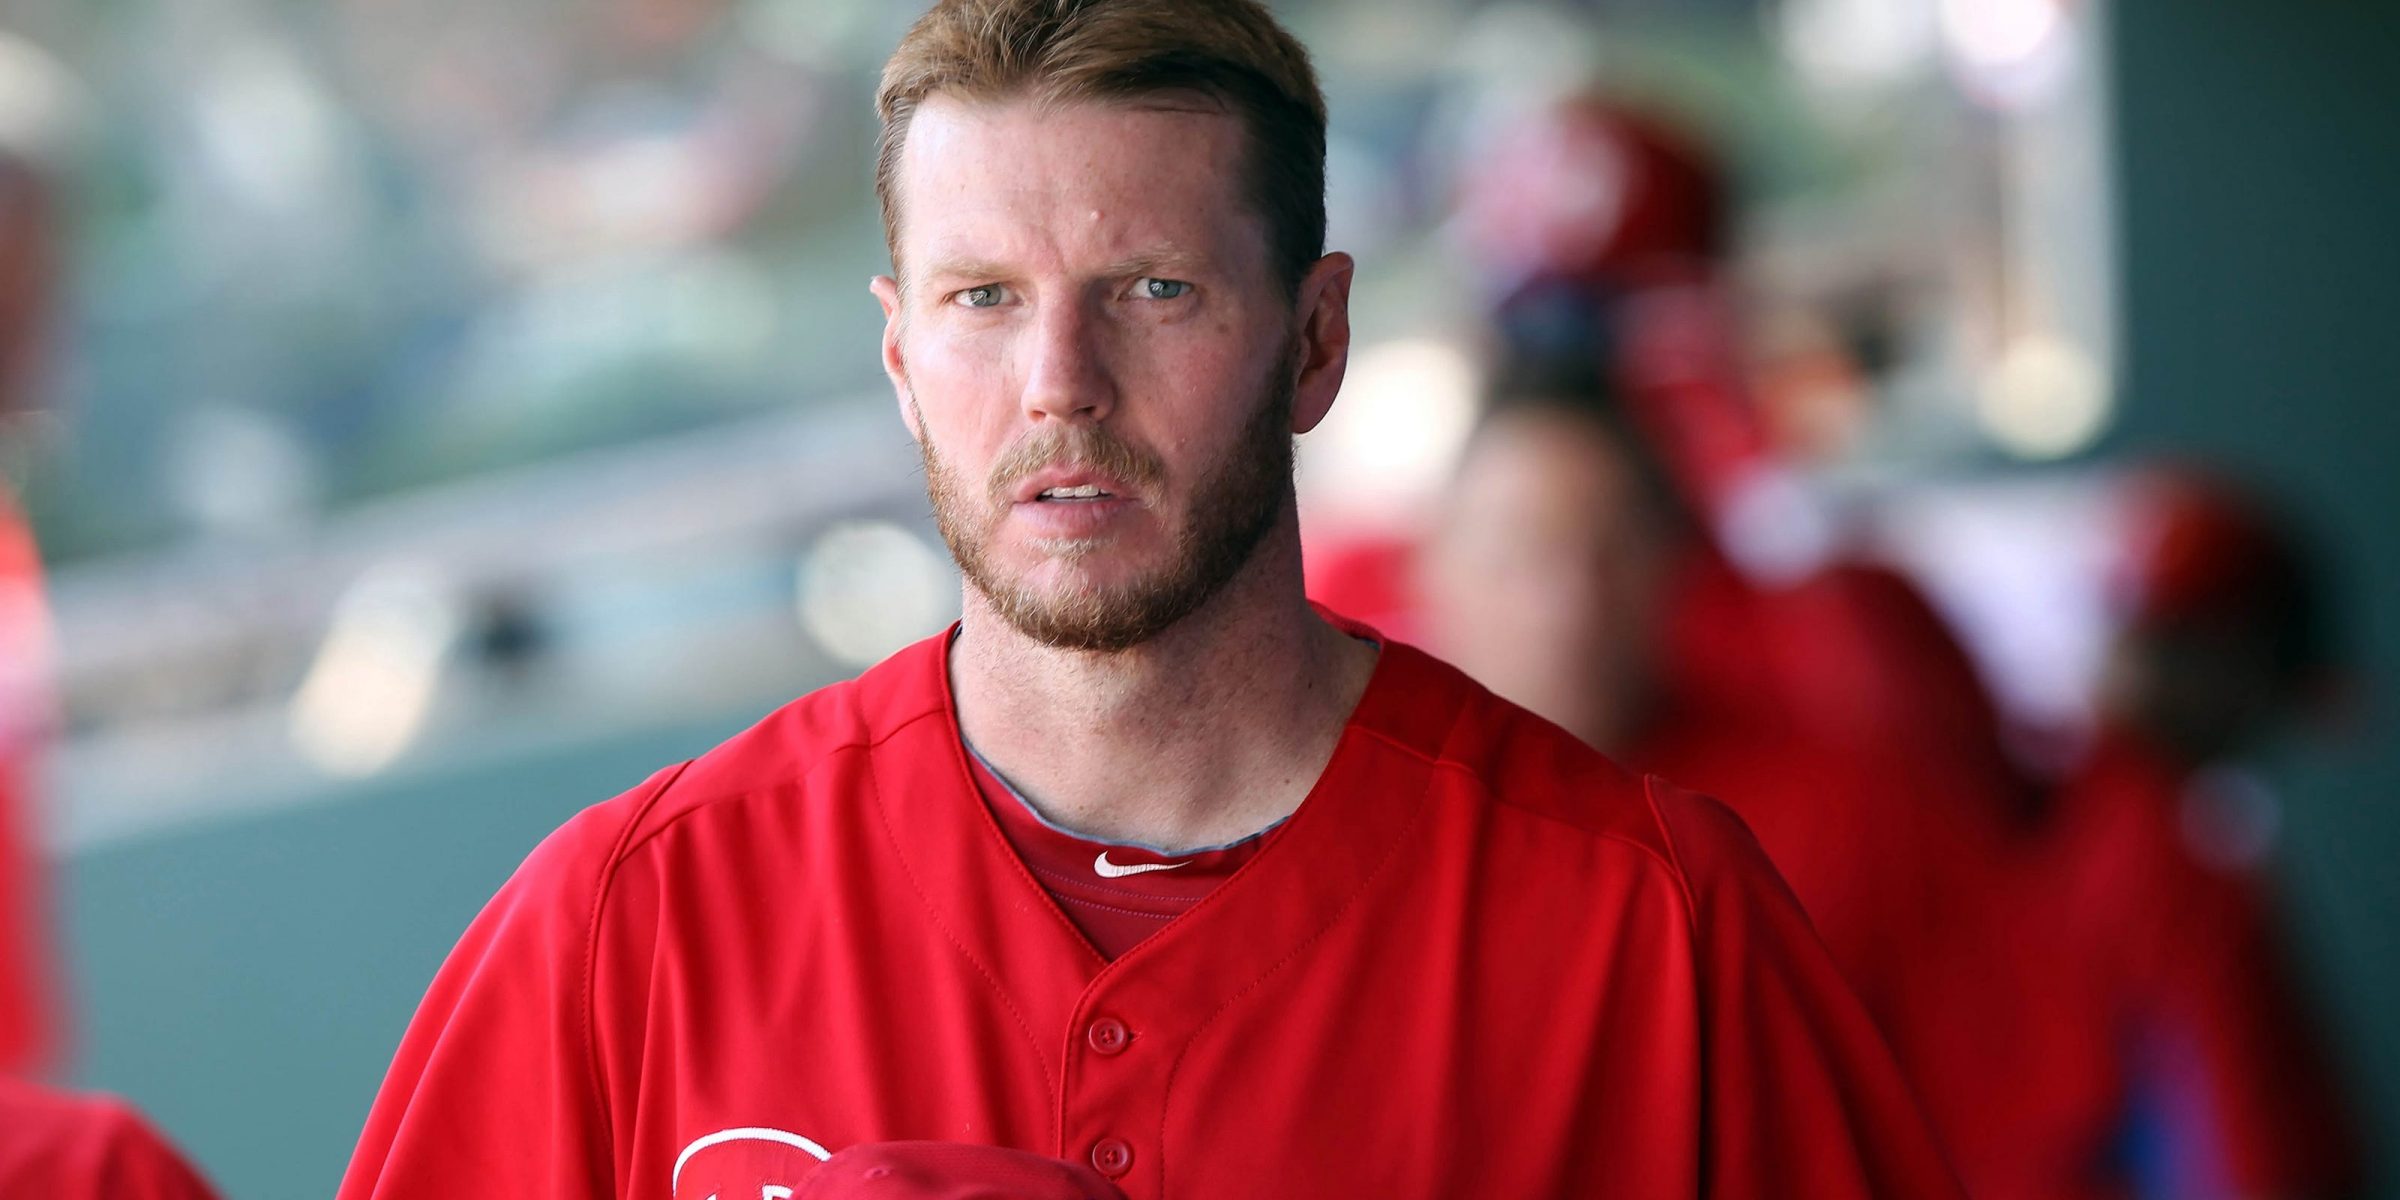 Roy Halladay’s drug addiction exposed in his cry for help in ESPN's 'Imperfect: The Roy Halladay Story'